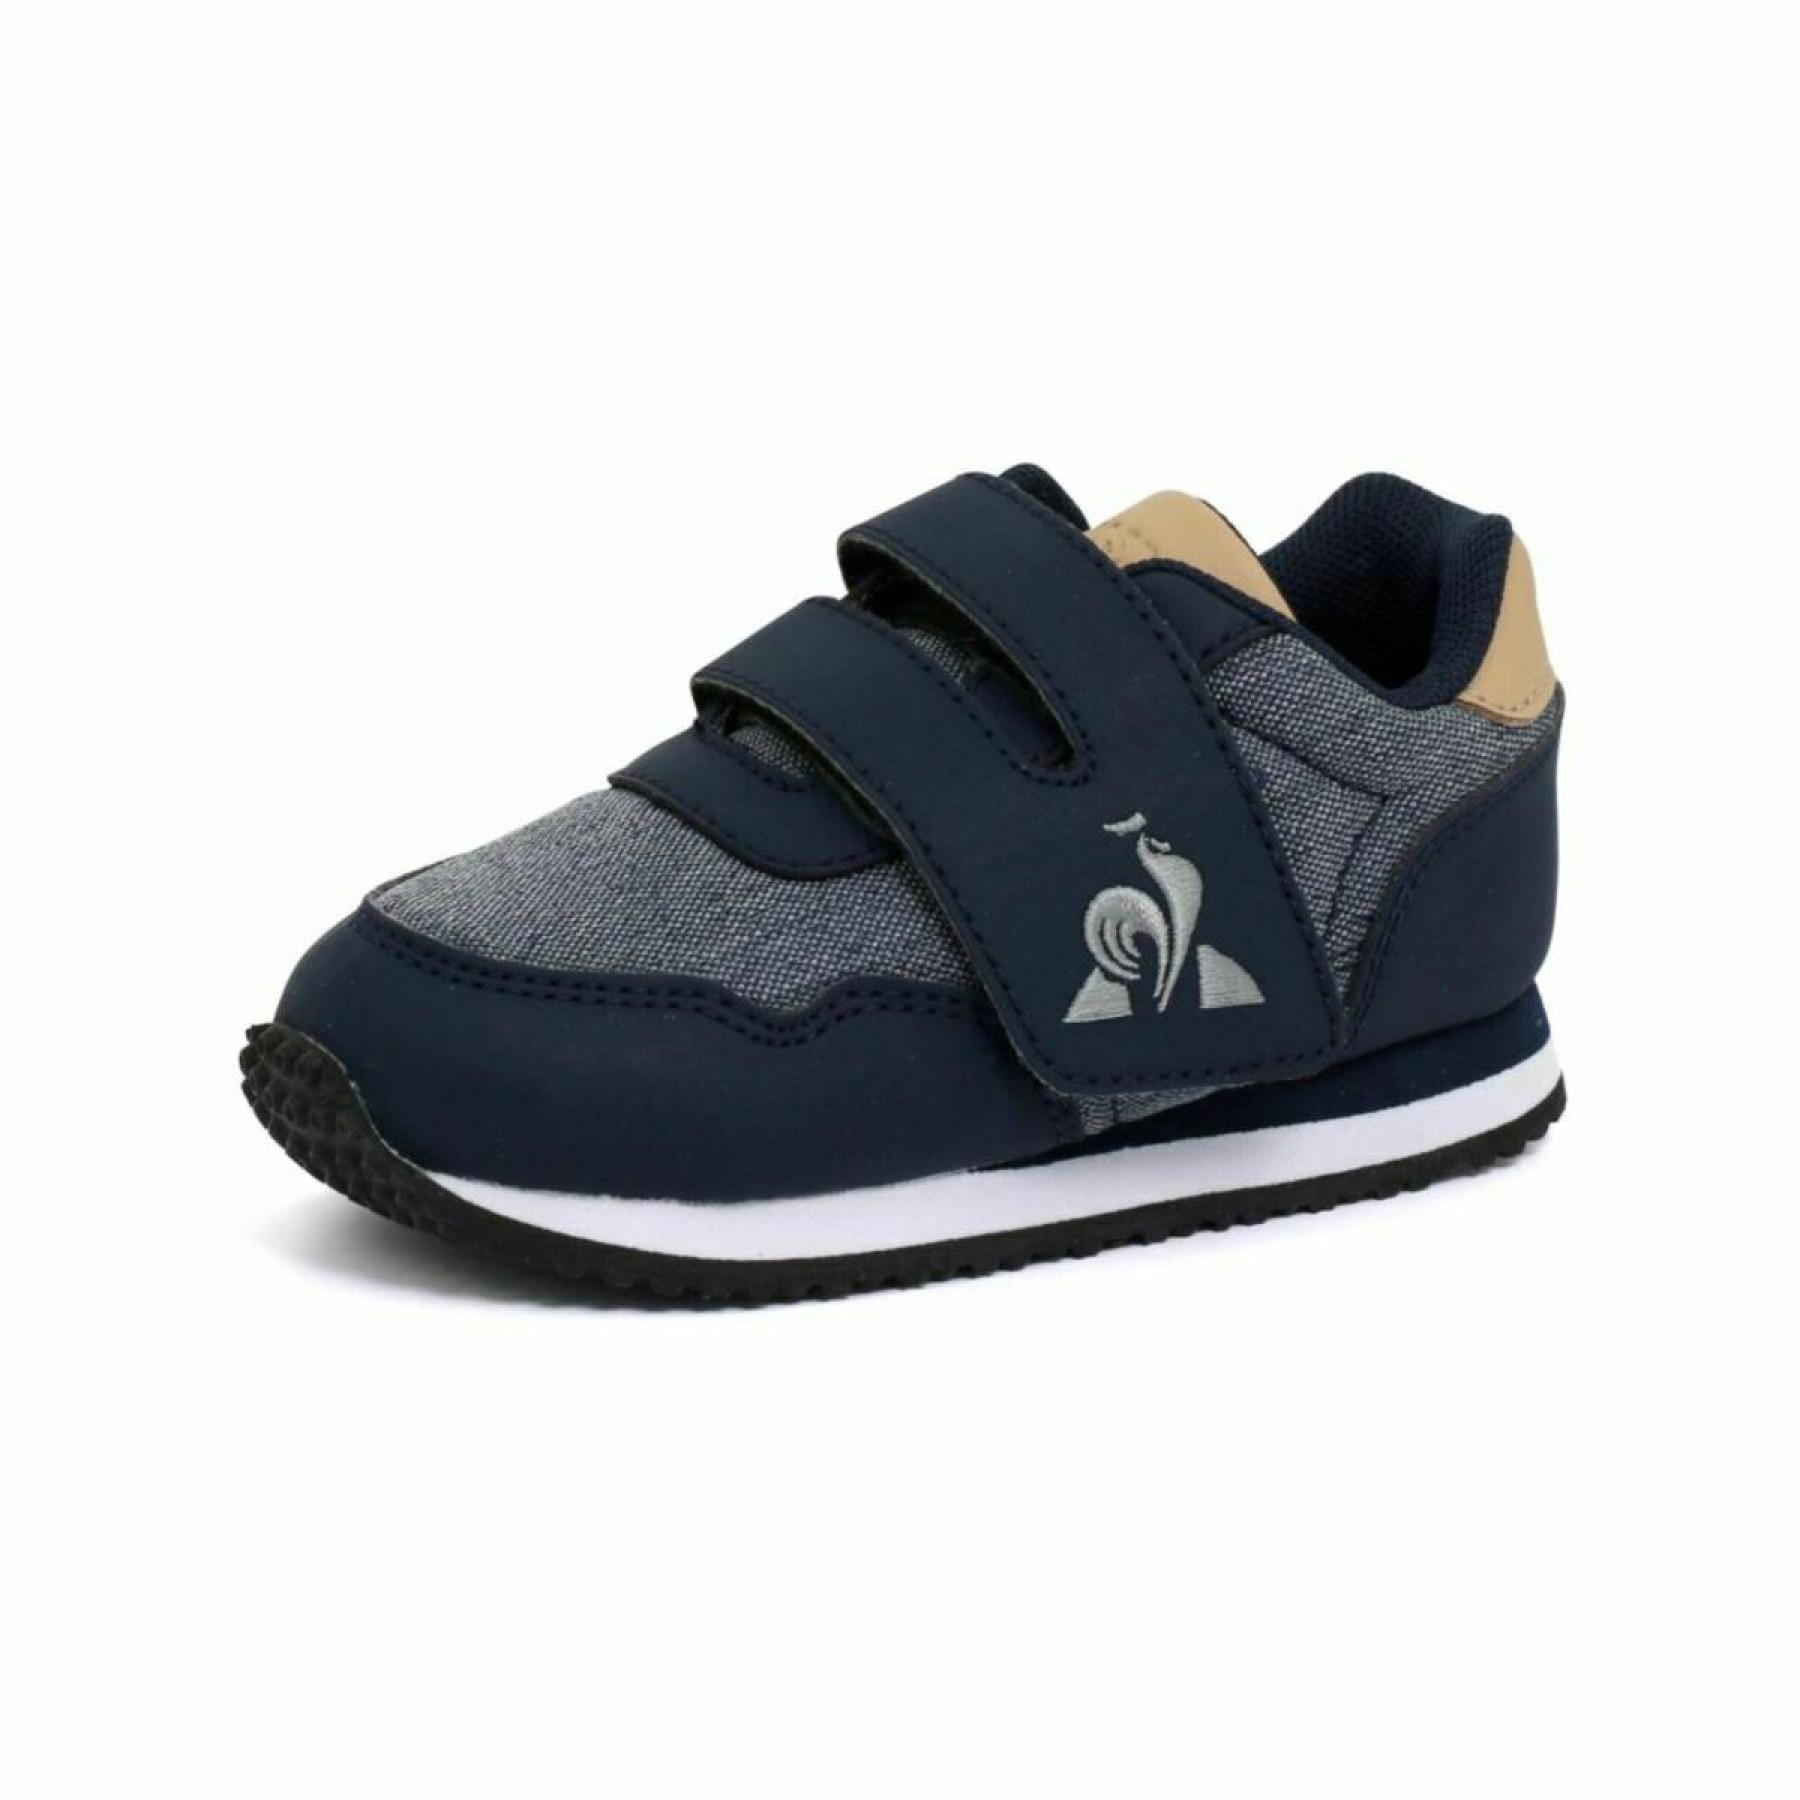 Kindertrainer Le Coq Sportif Astra classic inf